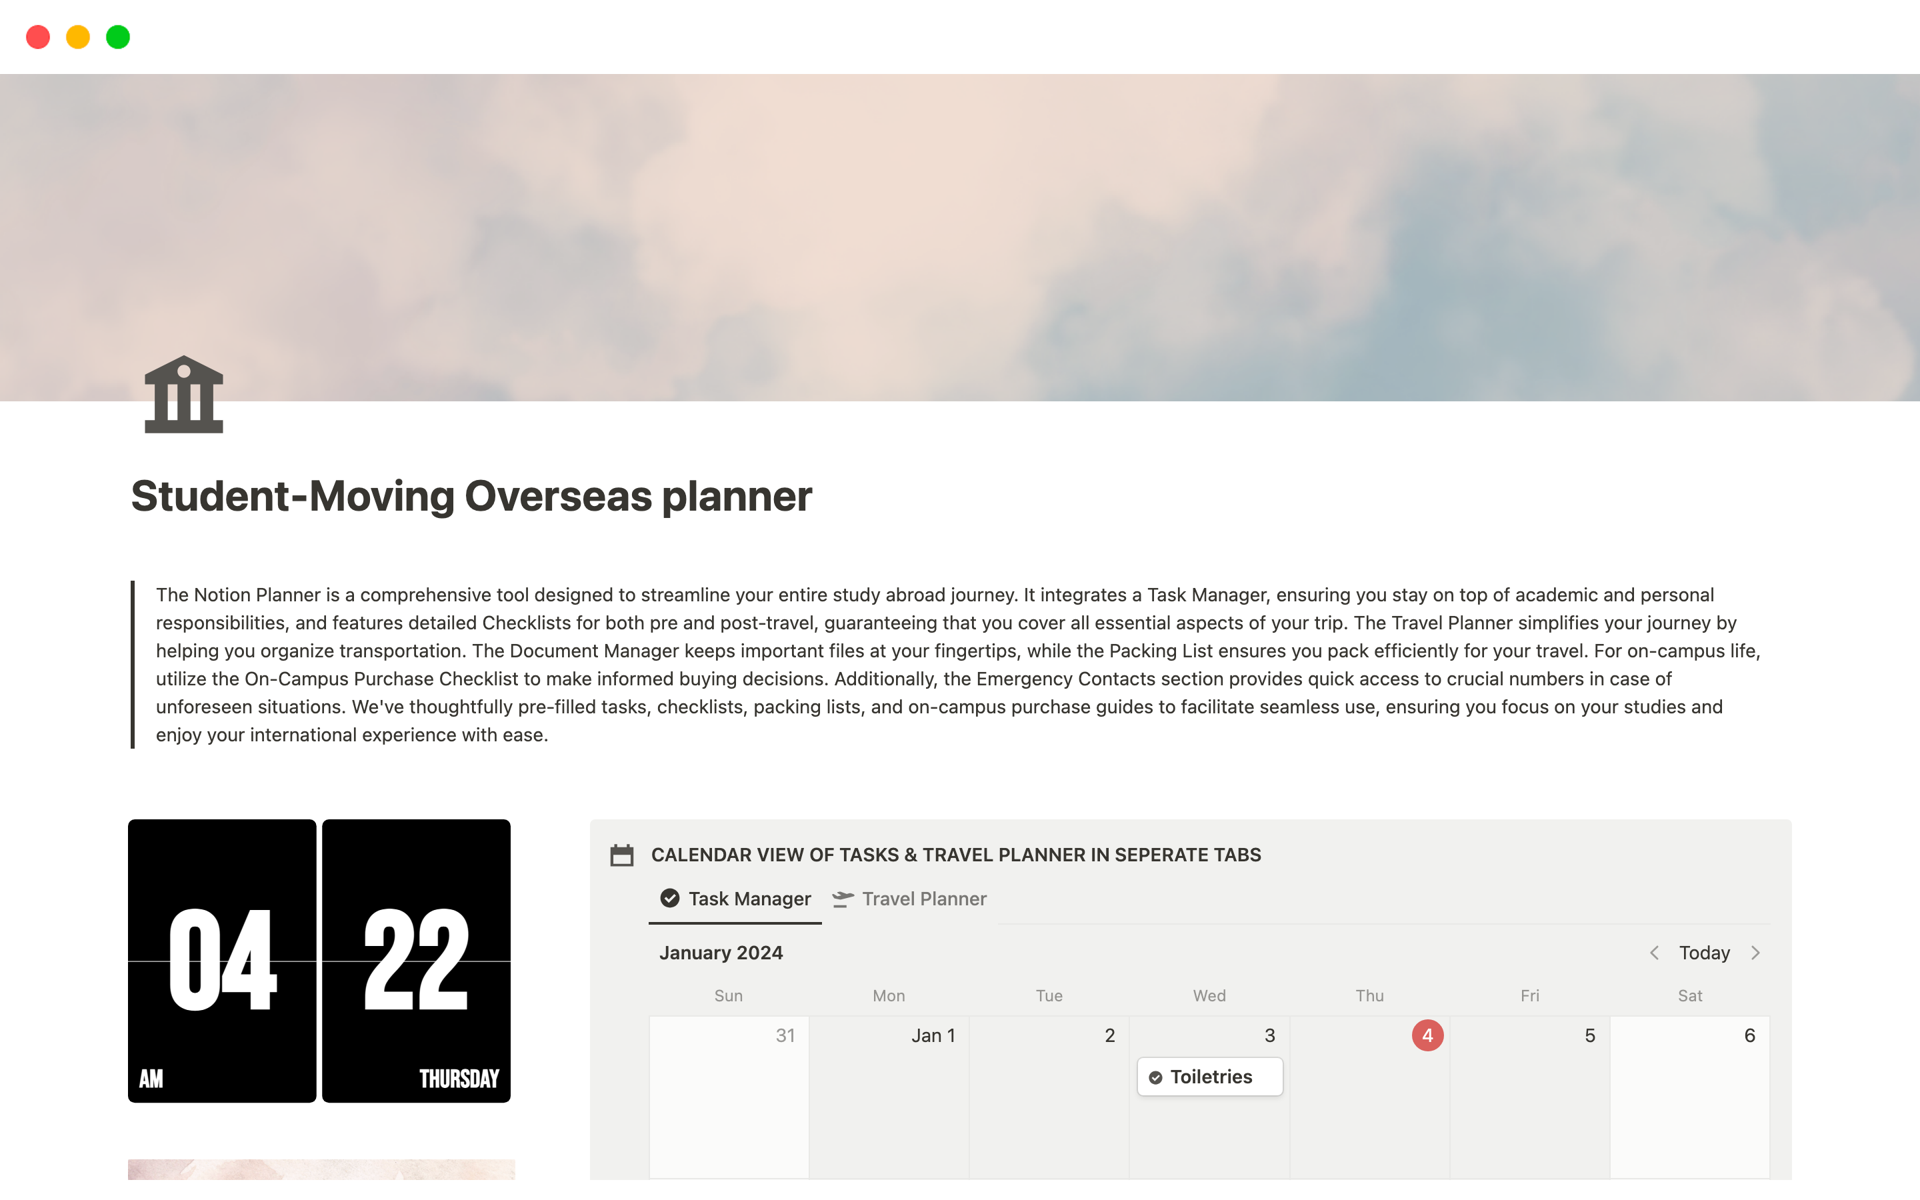 Student-Moving Overseas planner - provides a checklist, a to-do list, task manager, packing list, on-campus purchase list and a travel plan for students travelling overseas.